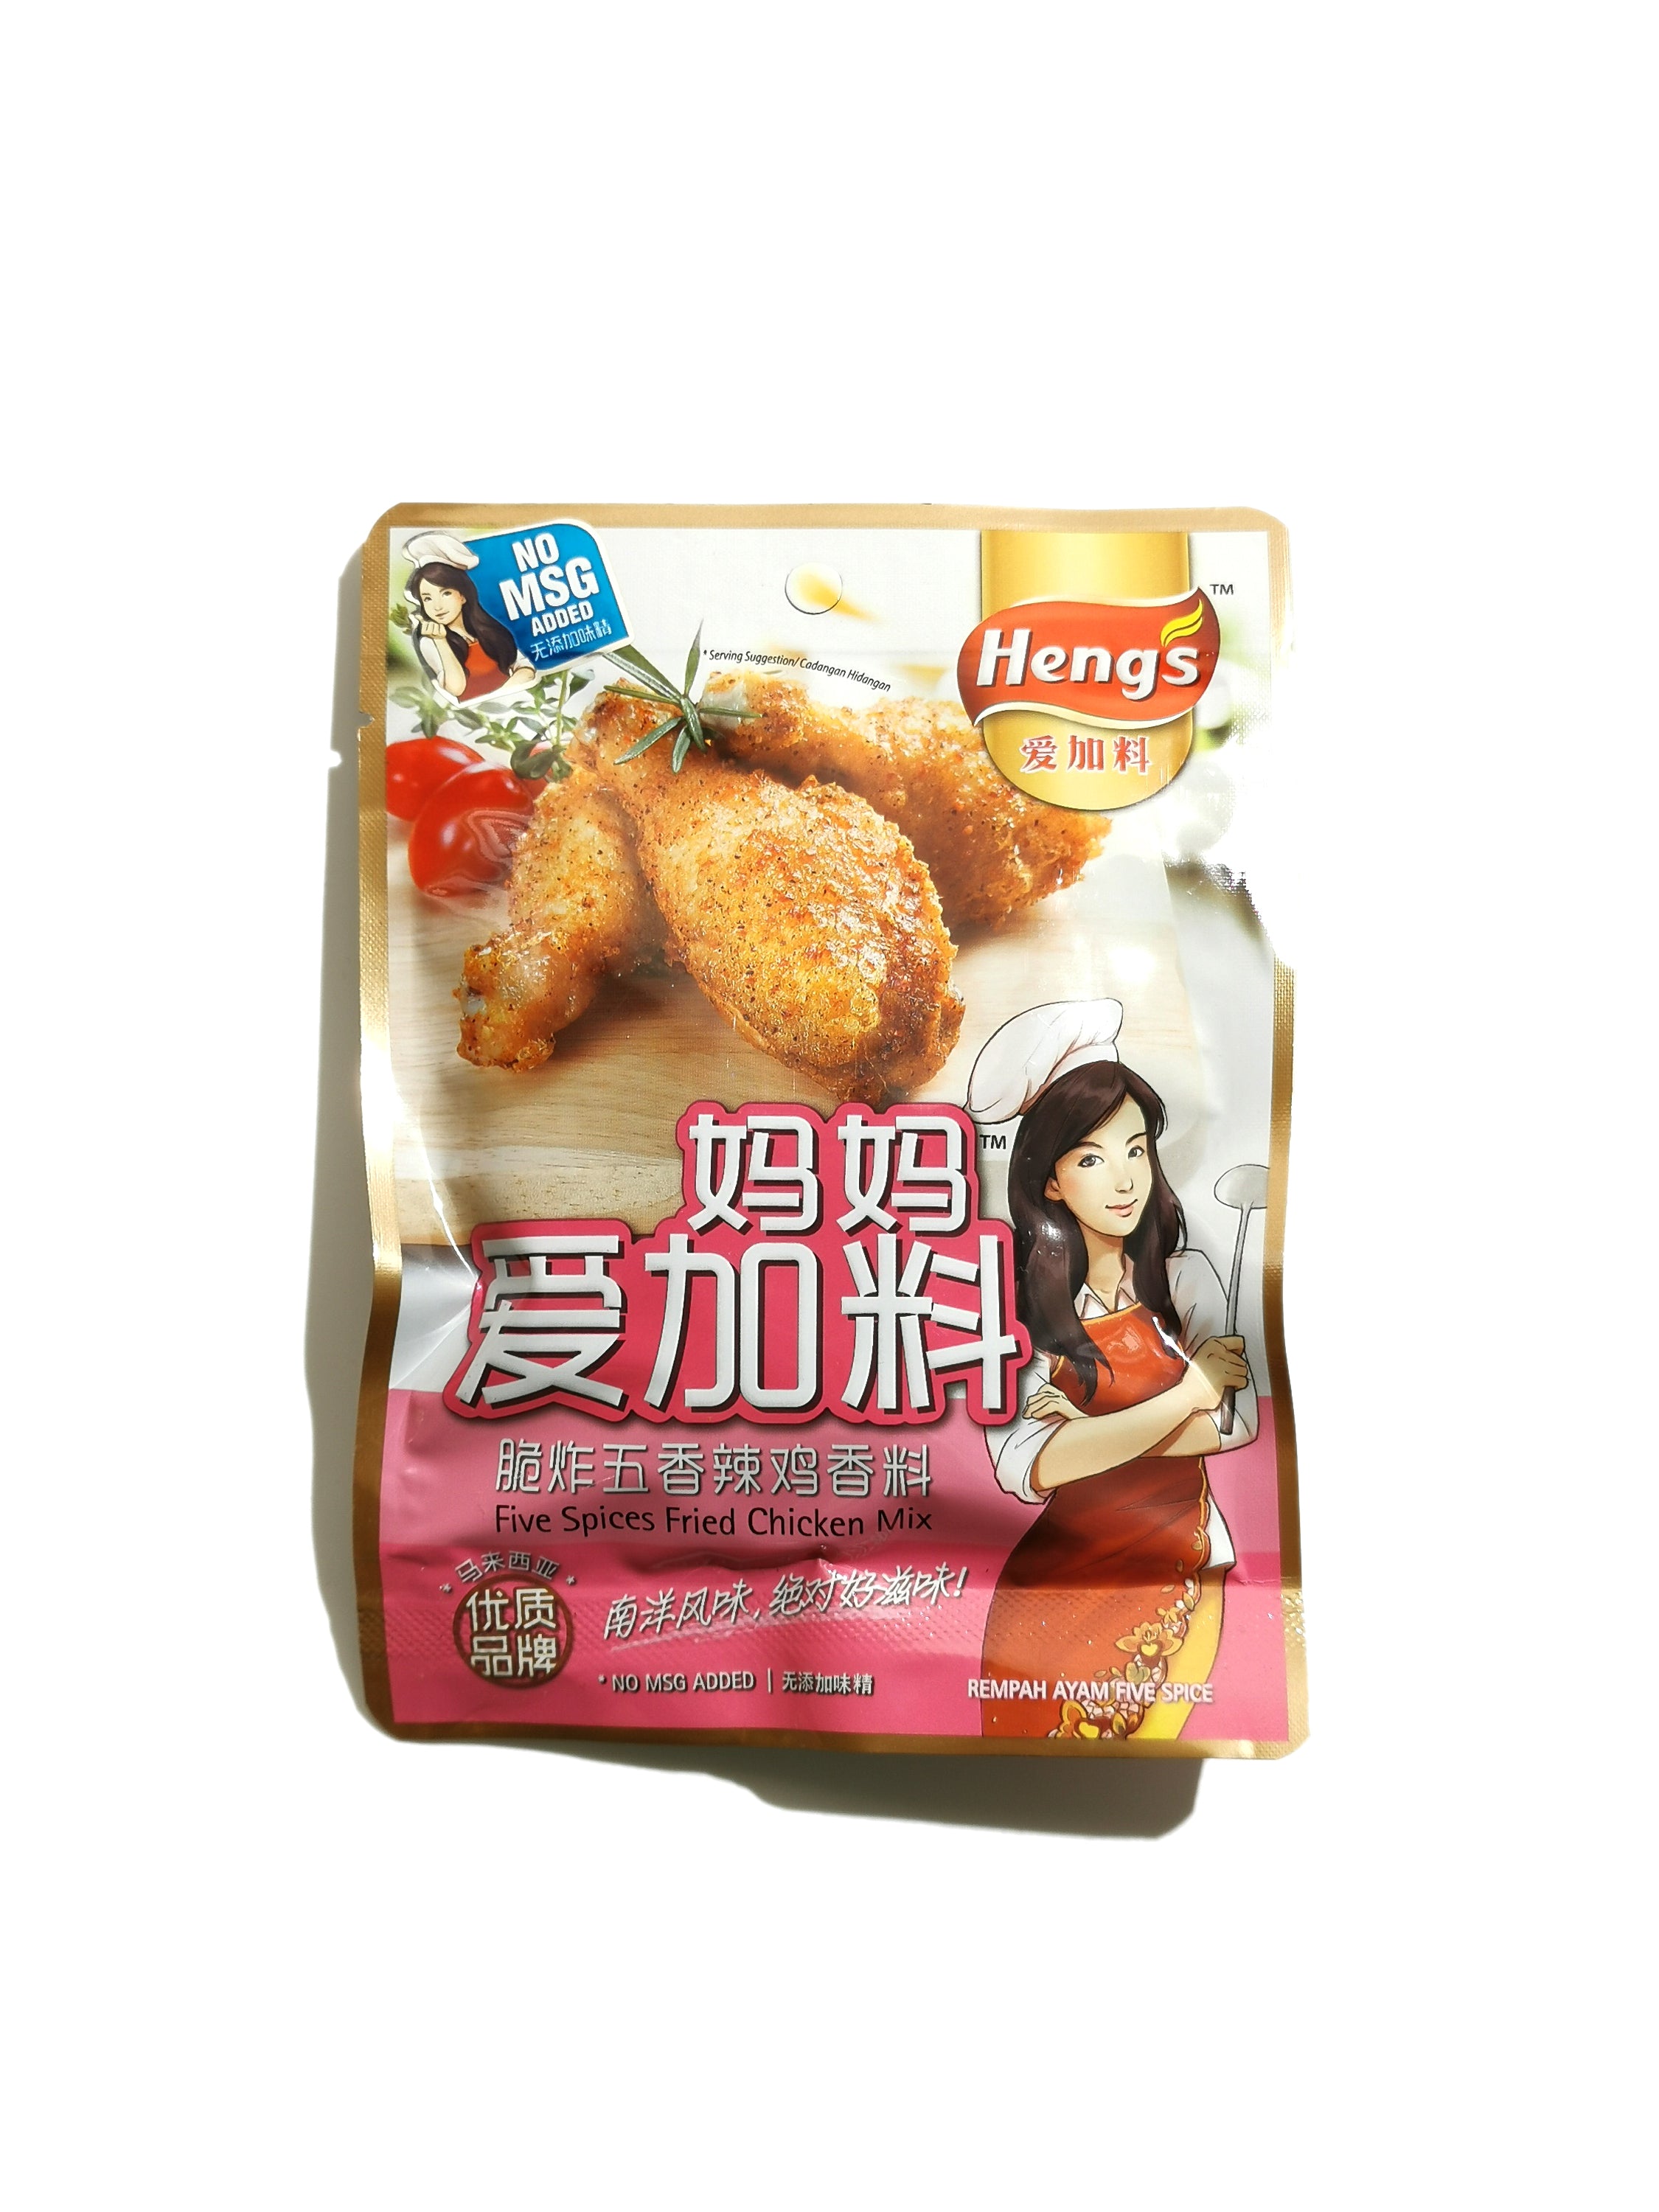 Heng's 5 Spices Fried Chicken Mix  愛加料五香炸粉 -50gm